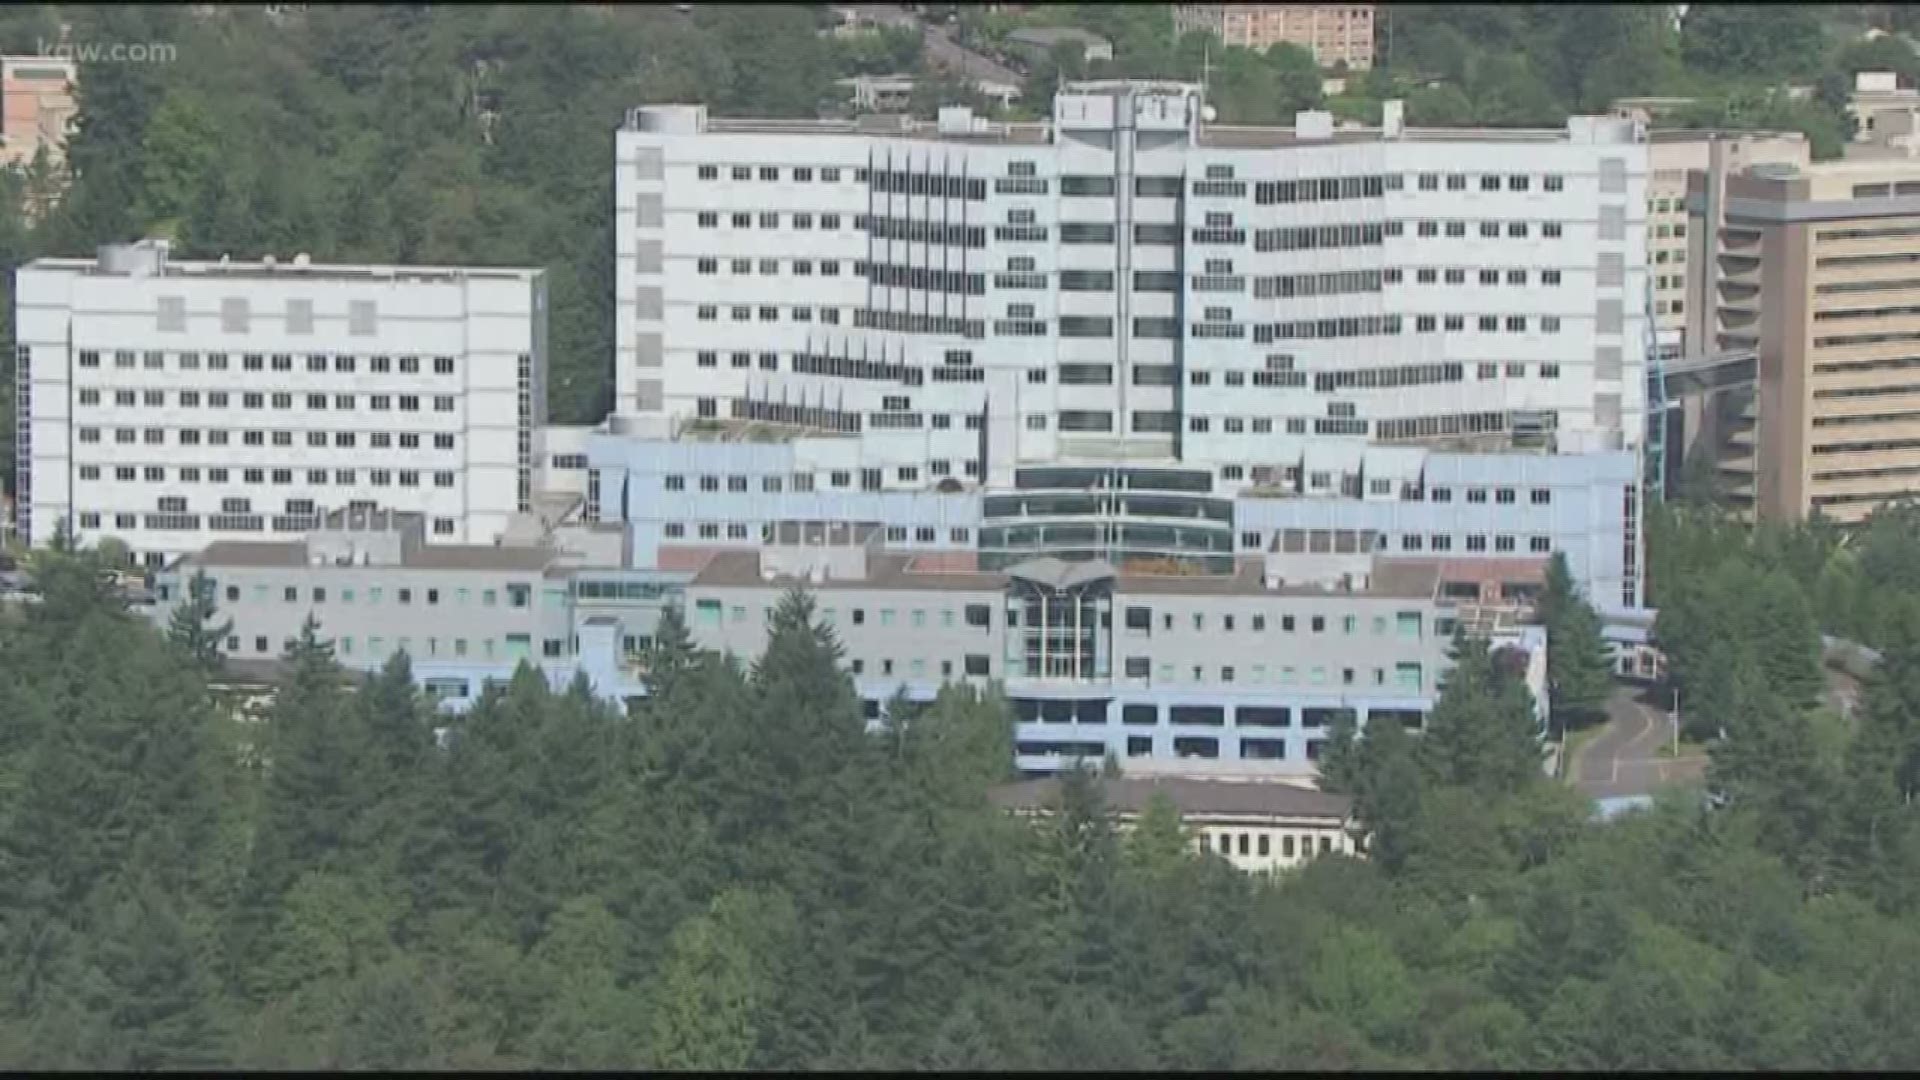 The first resident has tested positive in Multnomah County. The man is currently being treated at the Portland VA hospital.